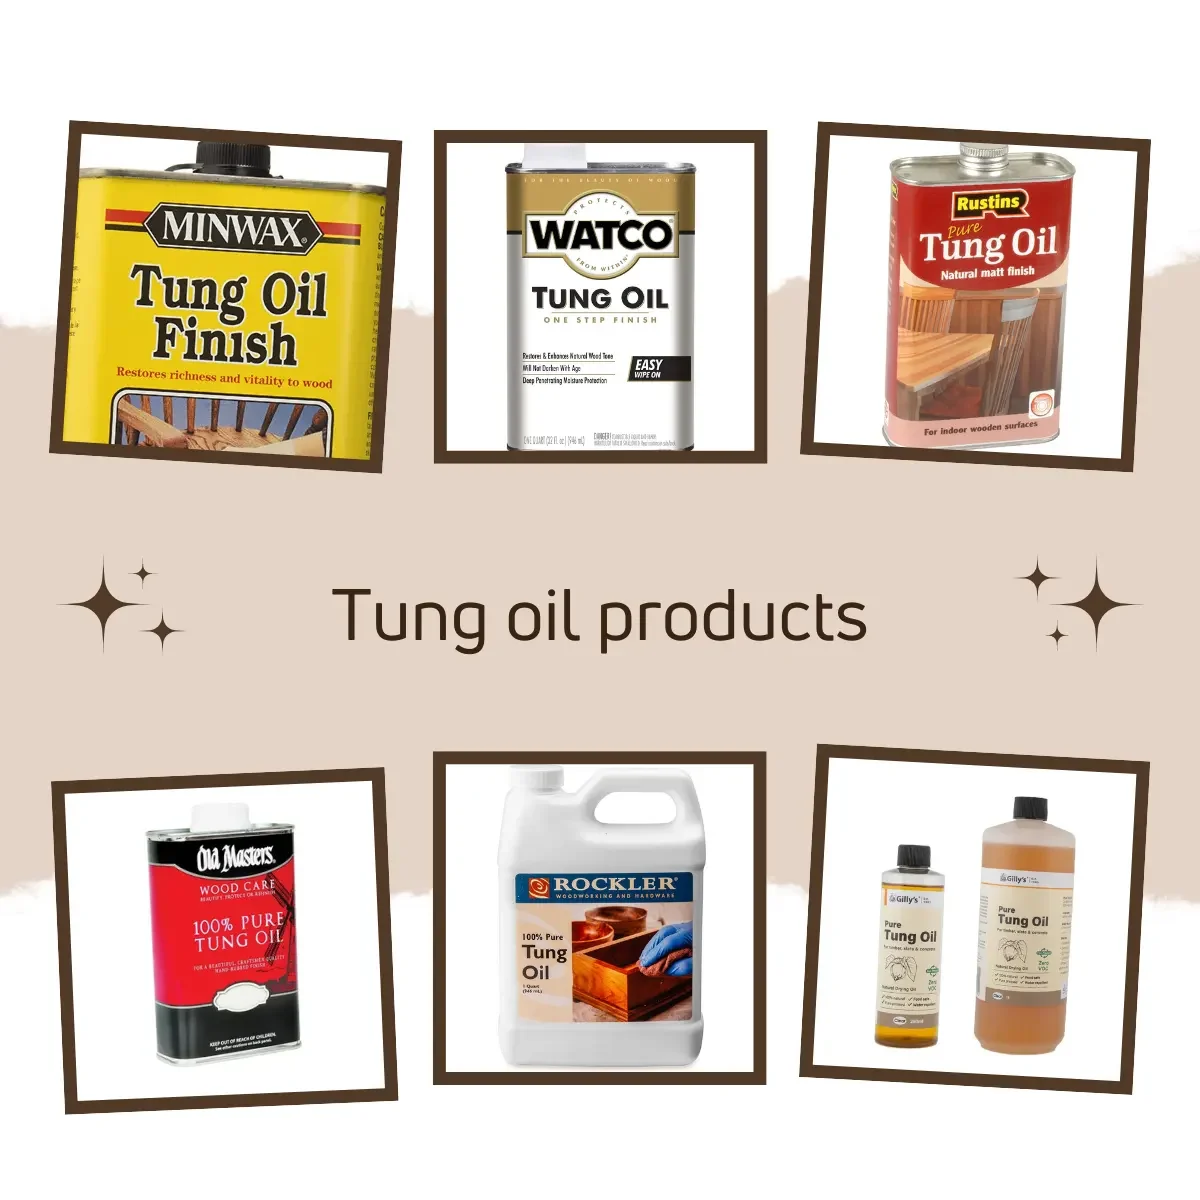 Tung oil products